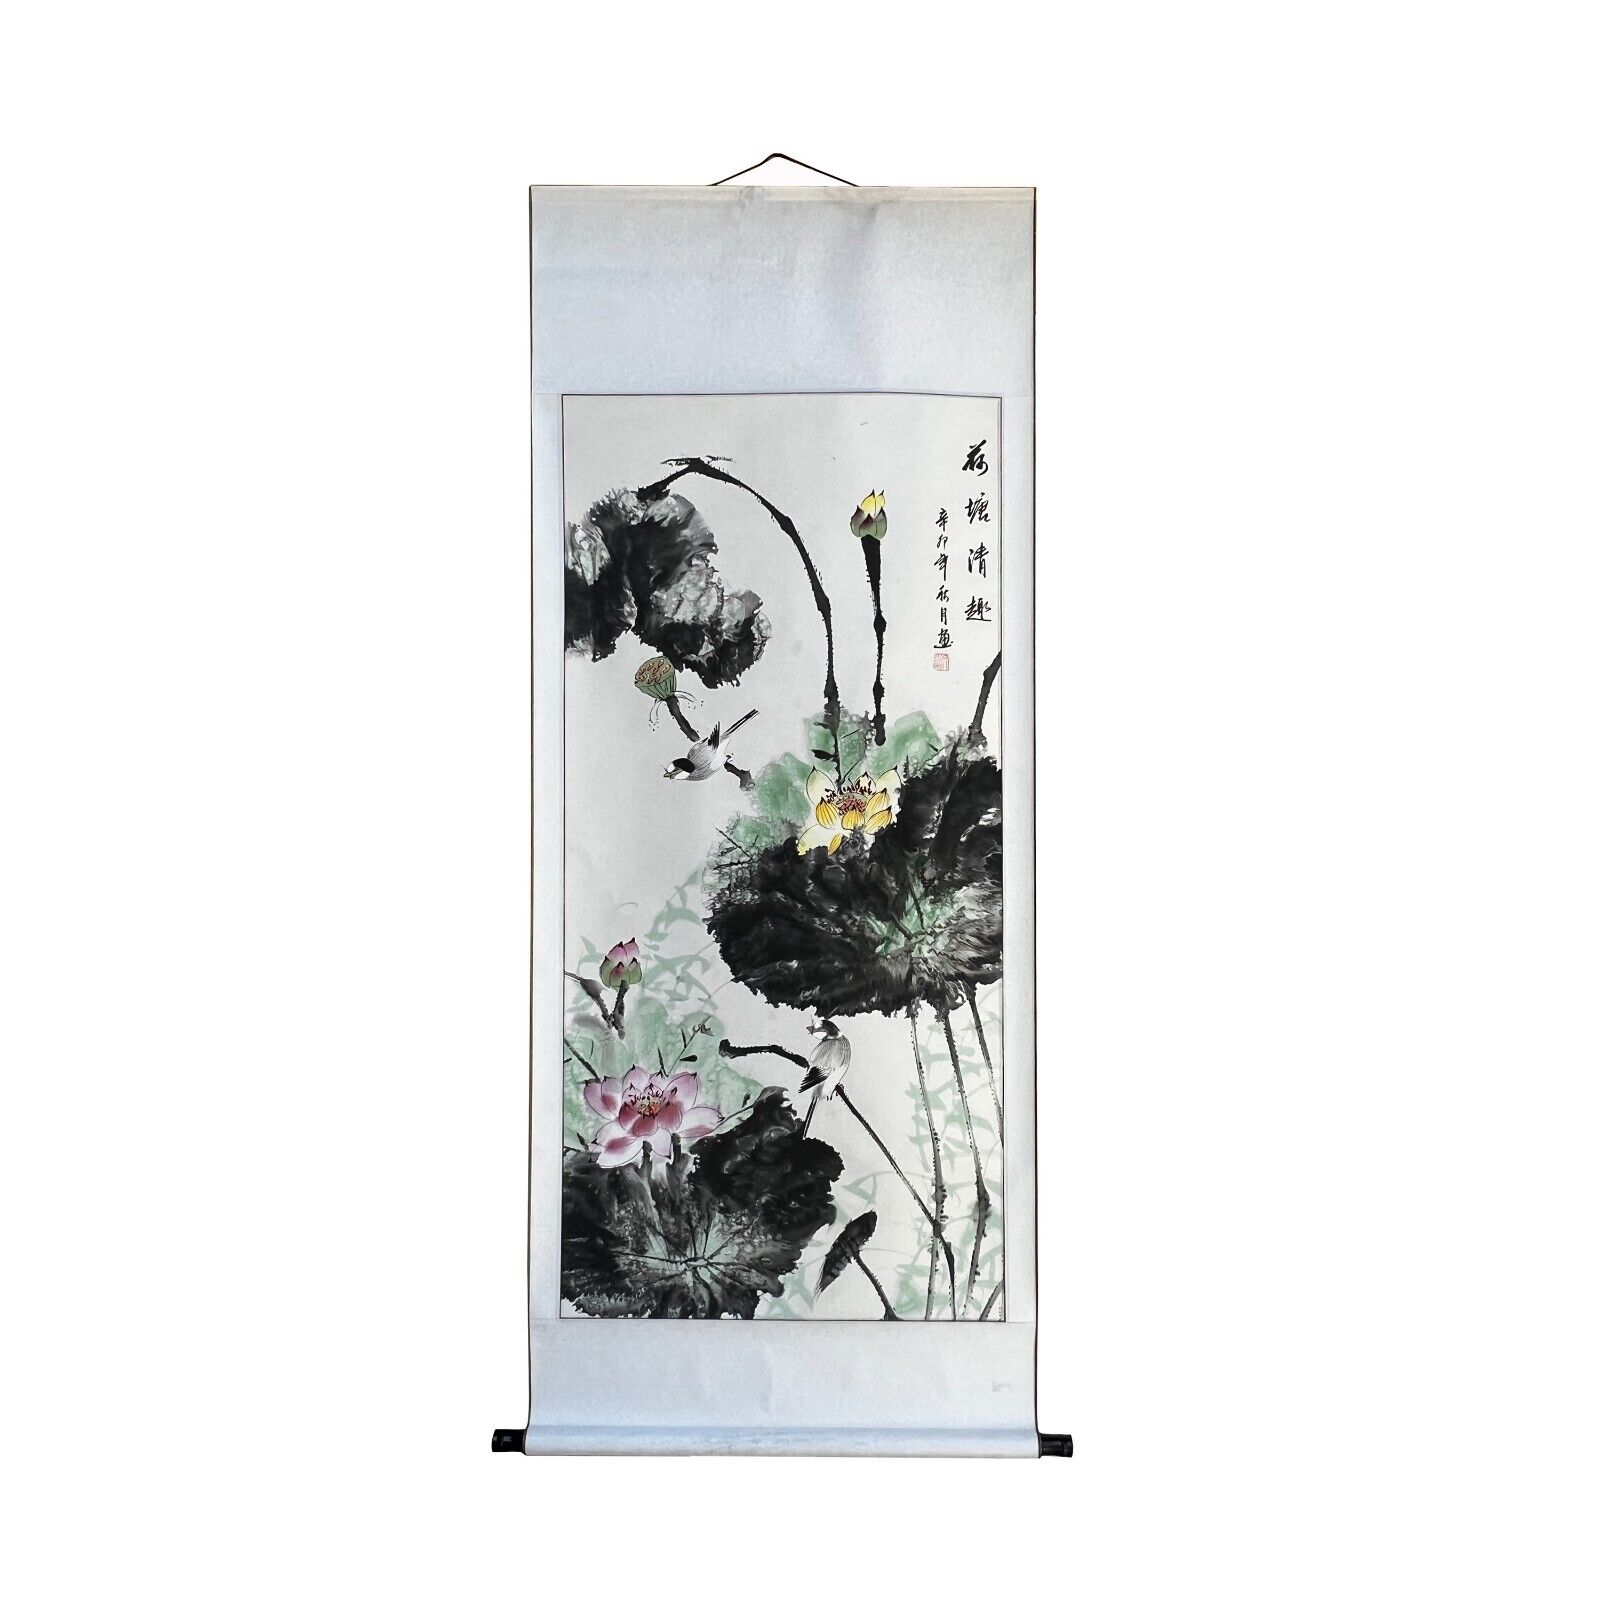 Chinese Color Ink Water Lotus Flowers Leaves Scroll Painting Wall Art ws3043